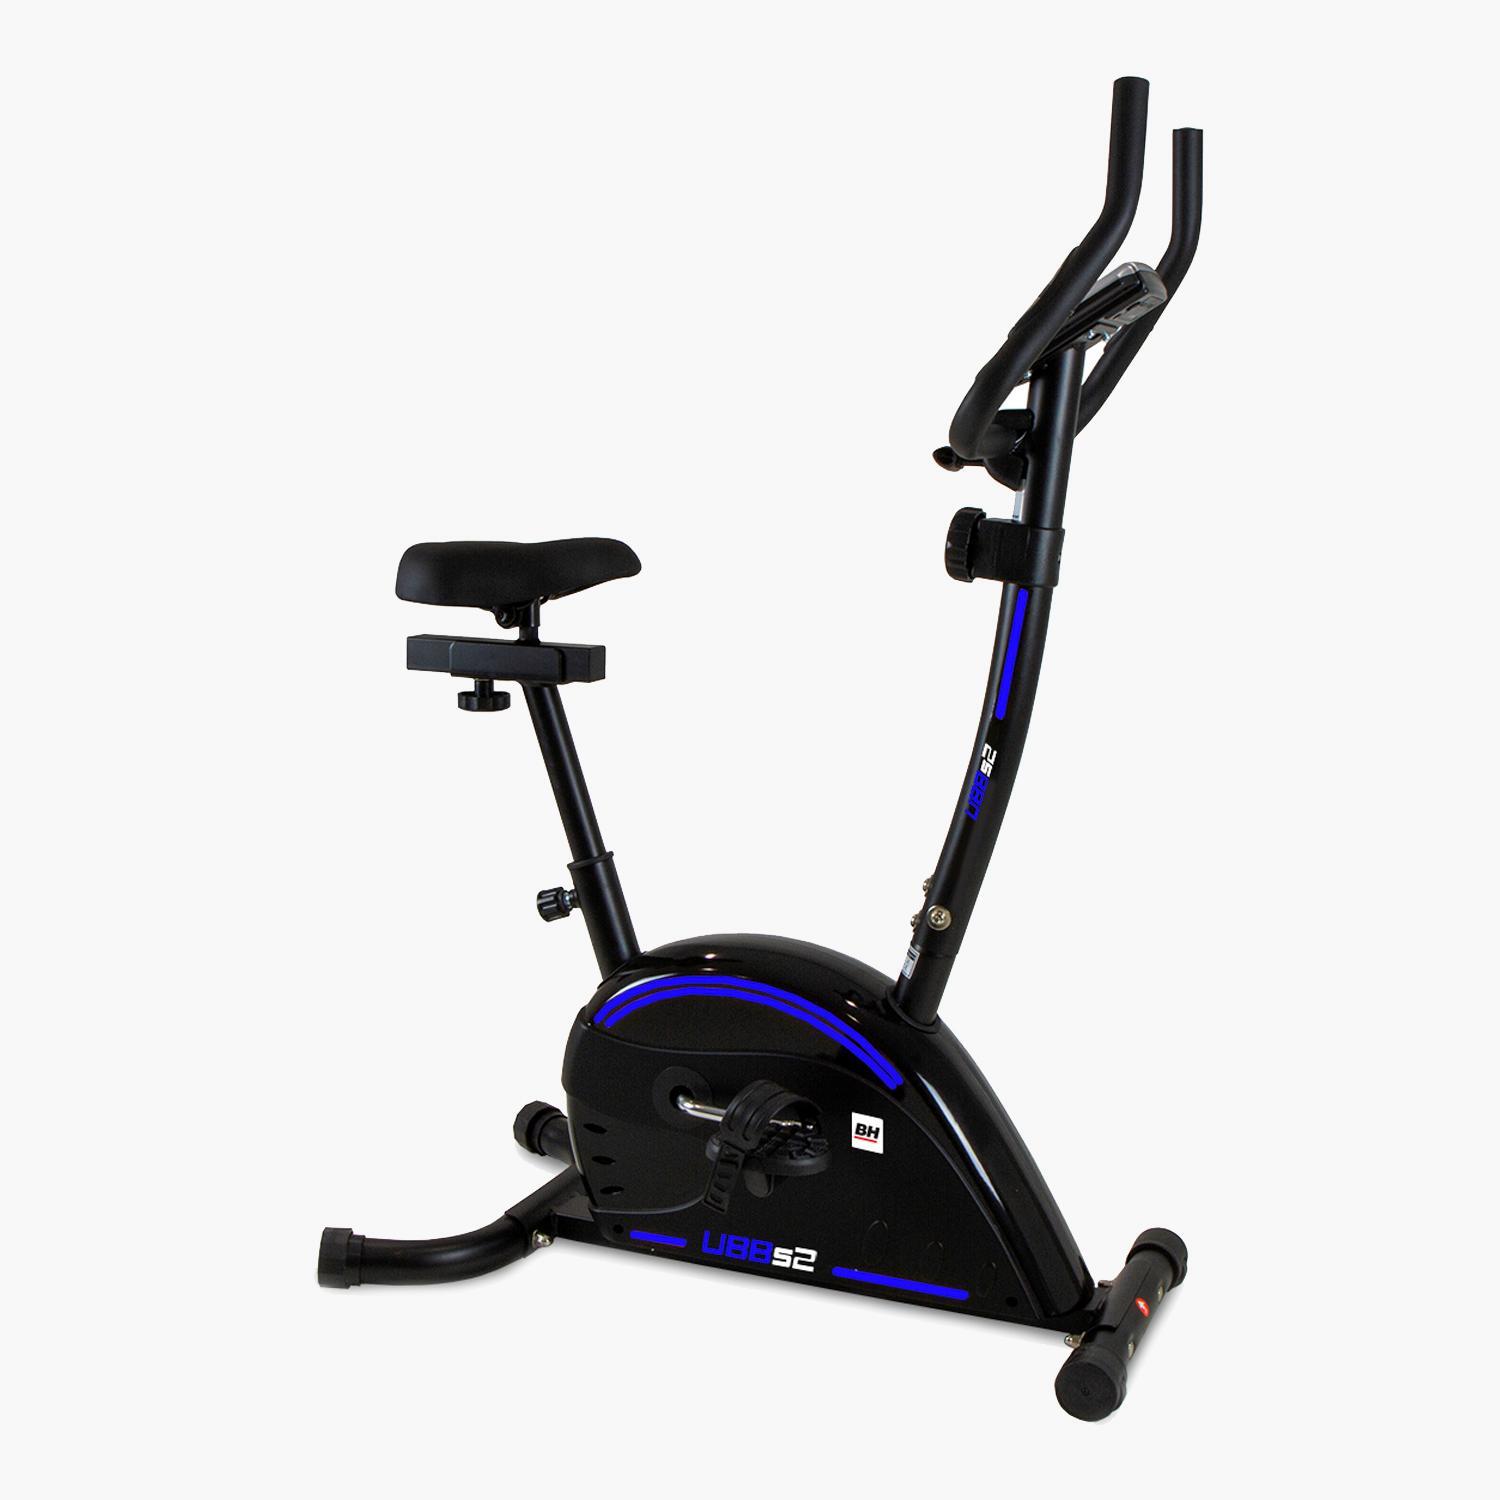 Bh UBSS2 8kg - Noir - Vélo Spinning sports taille UNICA